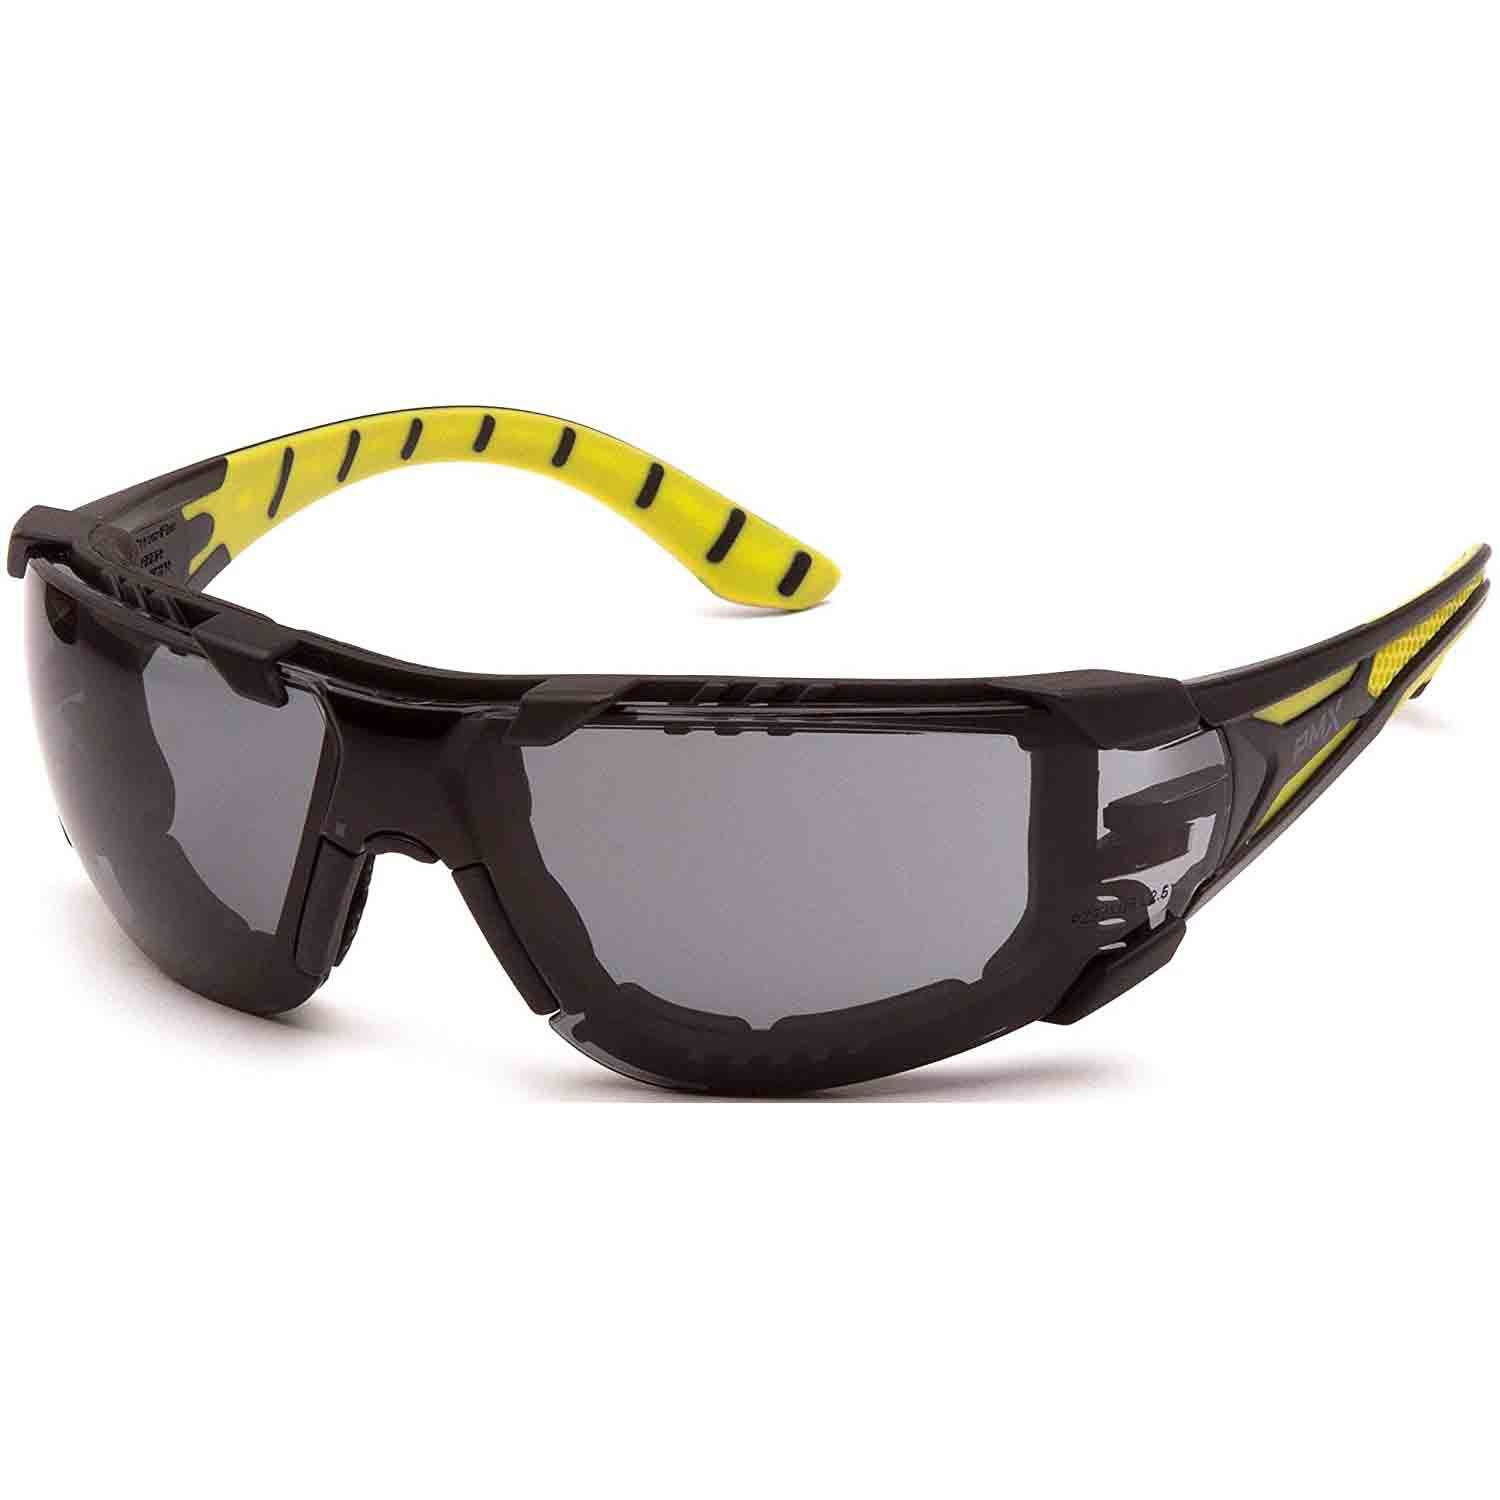 Safety Glasses with Intergrated Side Shields